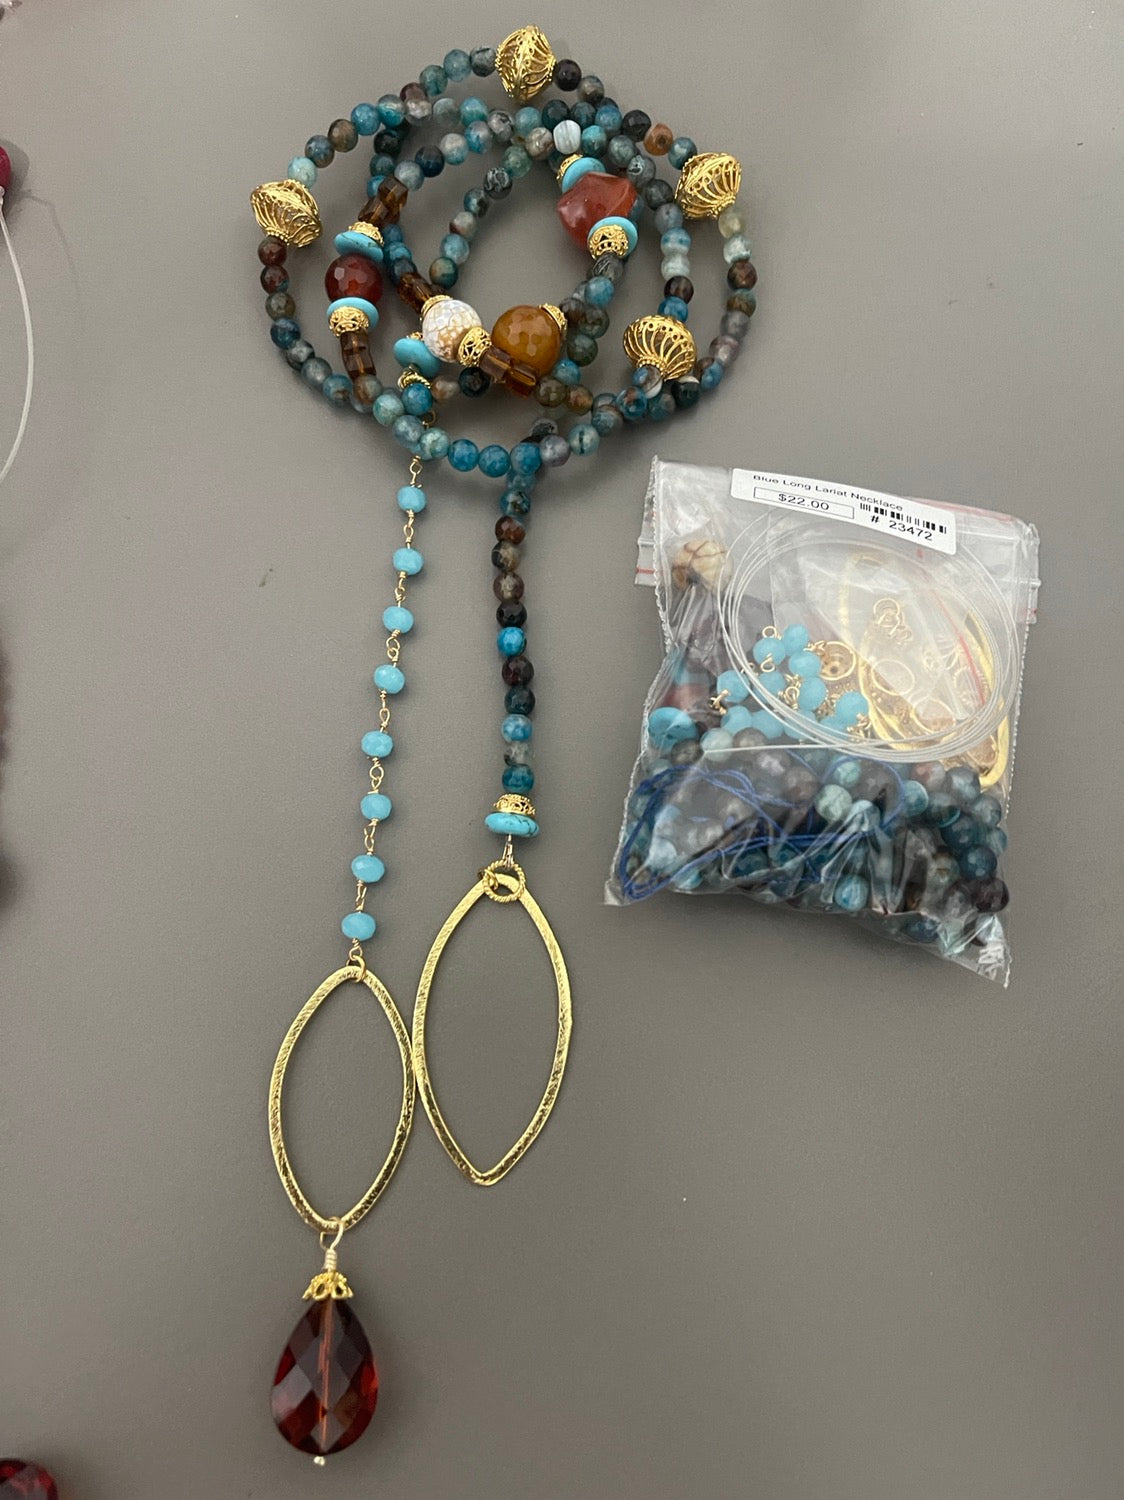 Blue Long Lariat Necklace kit all materials included Qty1- 23472